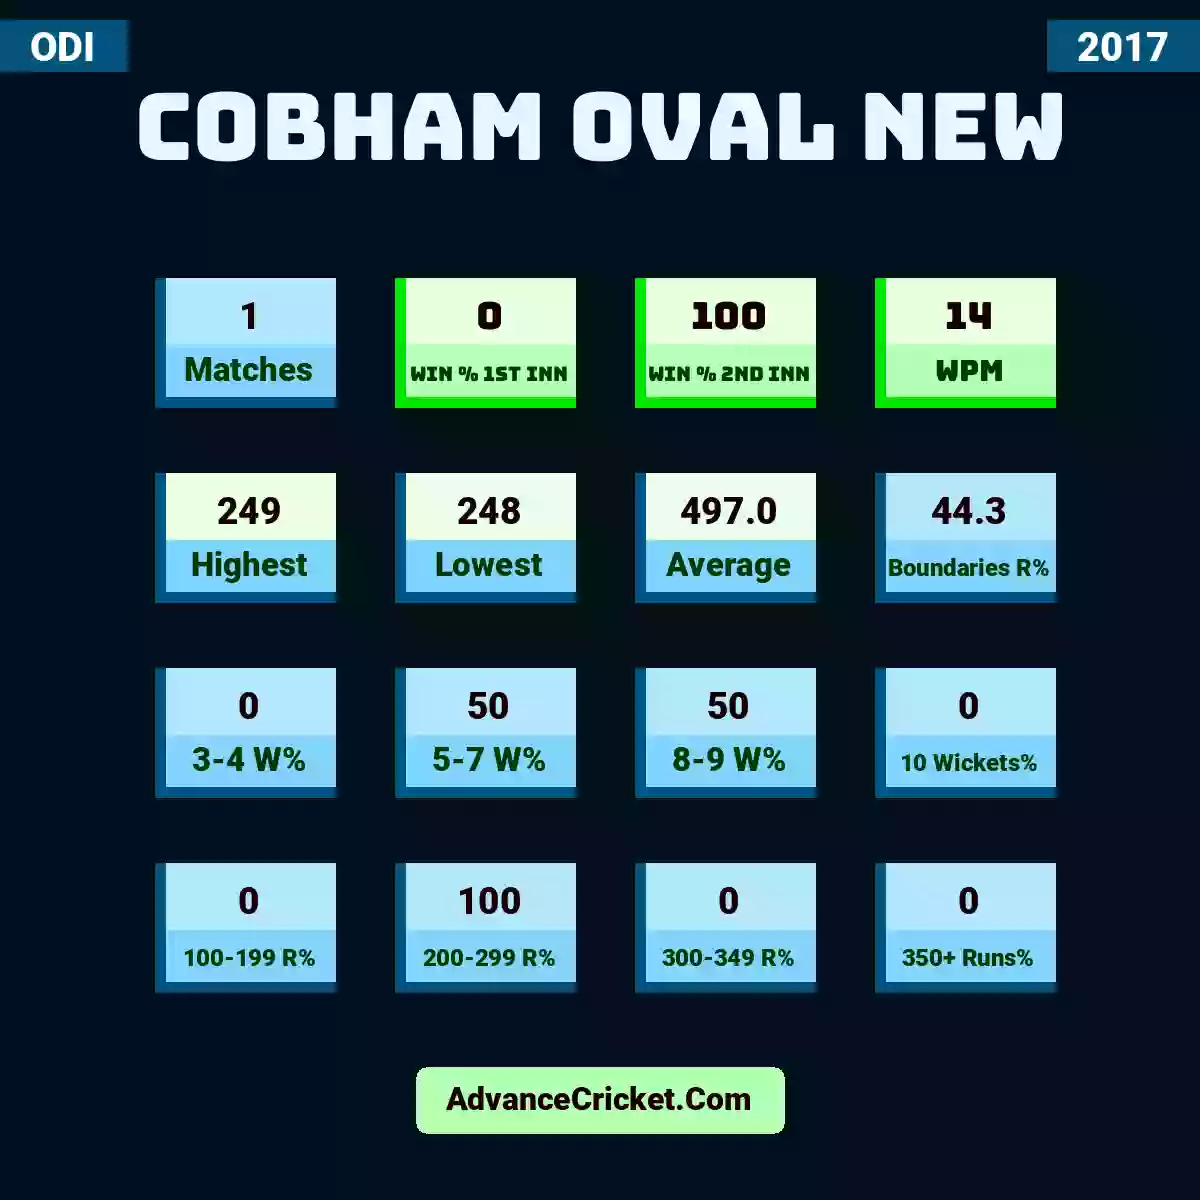 Image showing Cobham Oval New with Matches: 1, Win % 1st Inn: 0, Win % 2nd Inn: 100, WPM: 14, Highest: 249, Lowest: 248, Average: 497.0, Boundaries R%: 44.3, 3-4 W%: 0, 5-7 W%: 50, 8-9 W%: 50, 10 Wickets%: 0, 100-199 R%: 0, 200-299 R%: 100, 300-349 R%: 0, 350+ Runs%: 0.